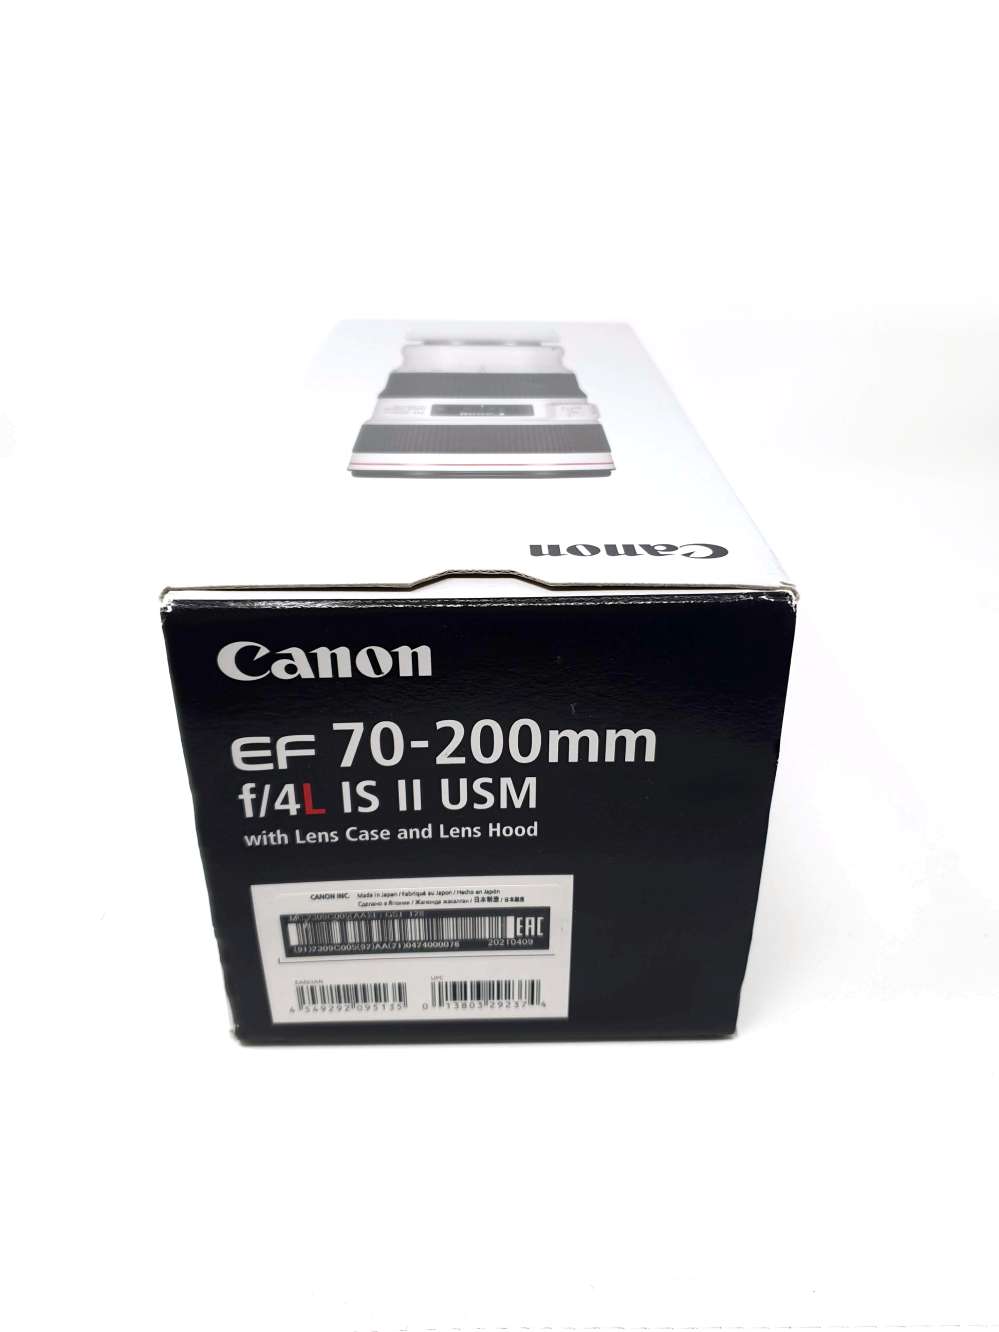 Canon EF 70-200mm f4L IS II USM Lens - Product Photo 8 - Product Box